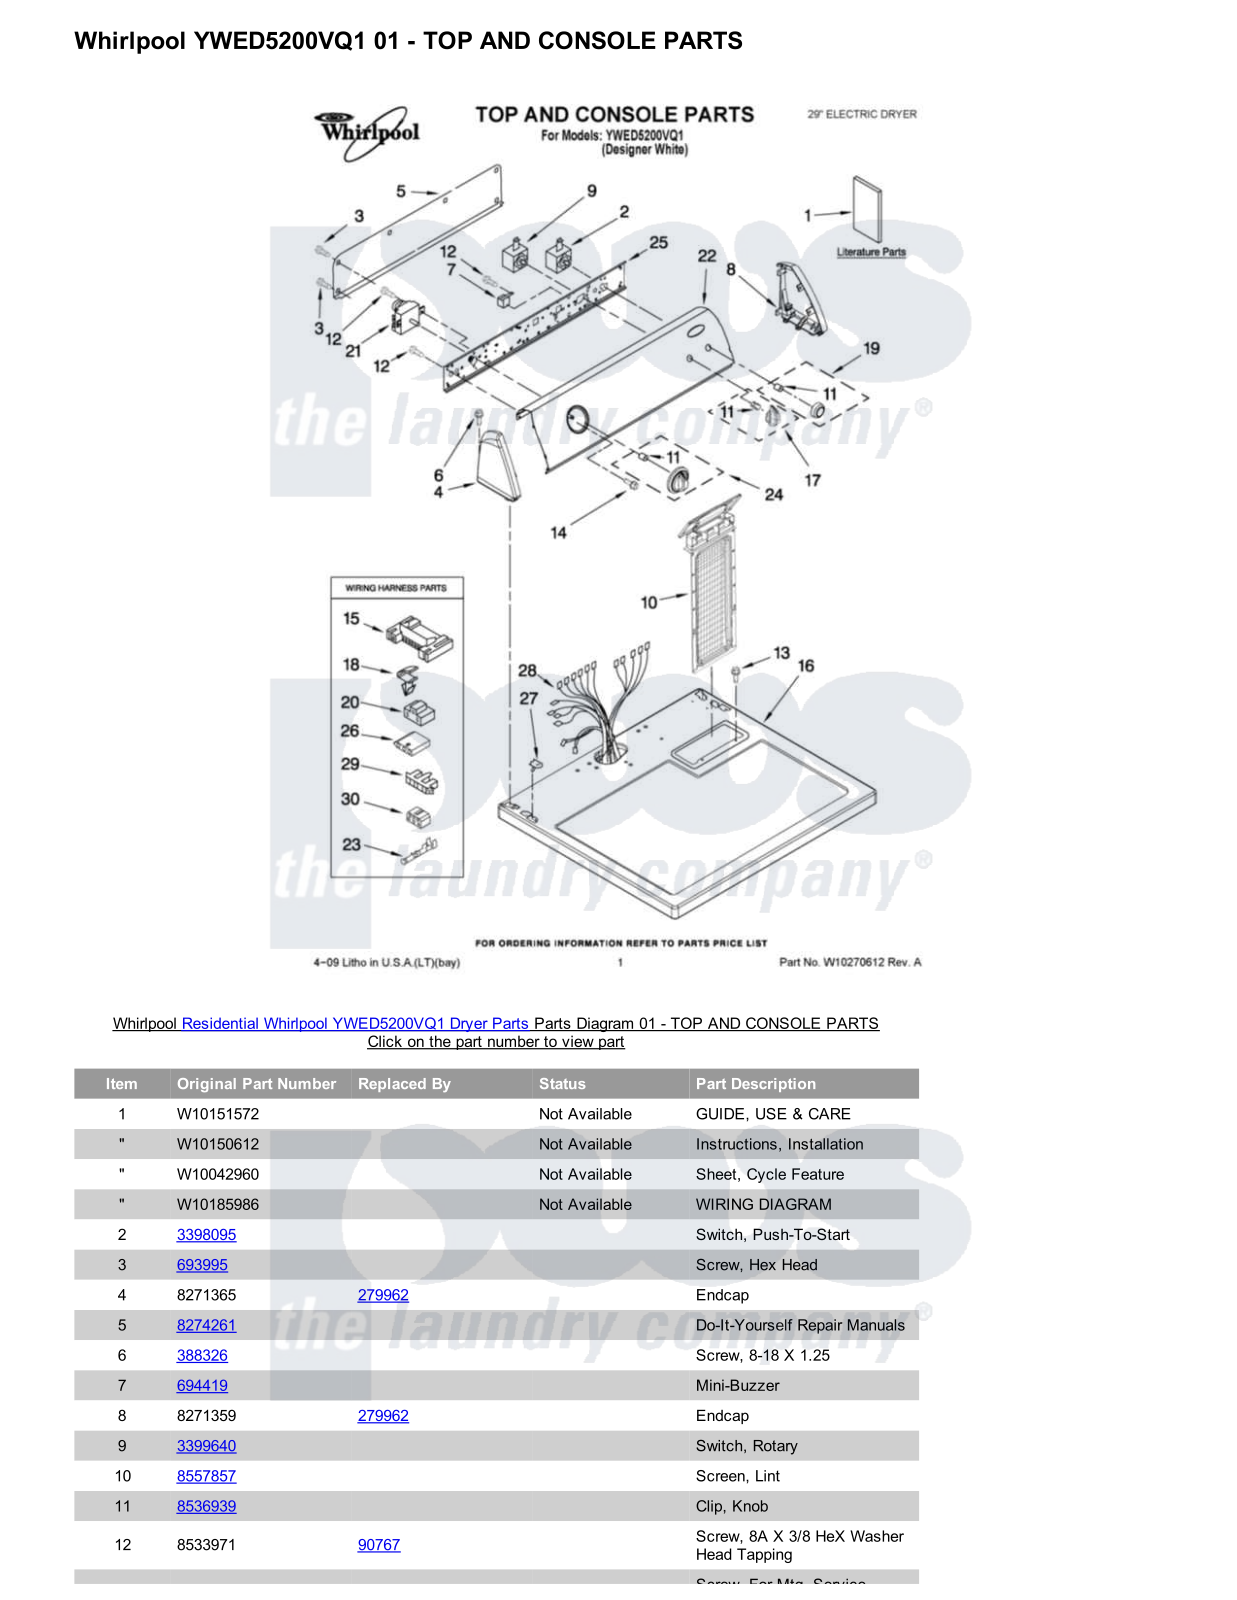 Whirlpool YWED5200VQ1 Parts Diagram